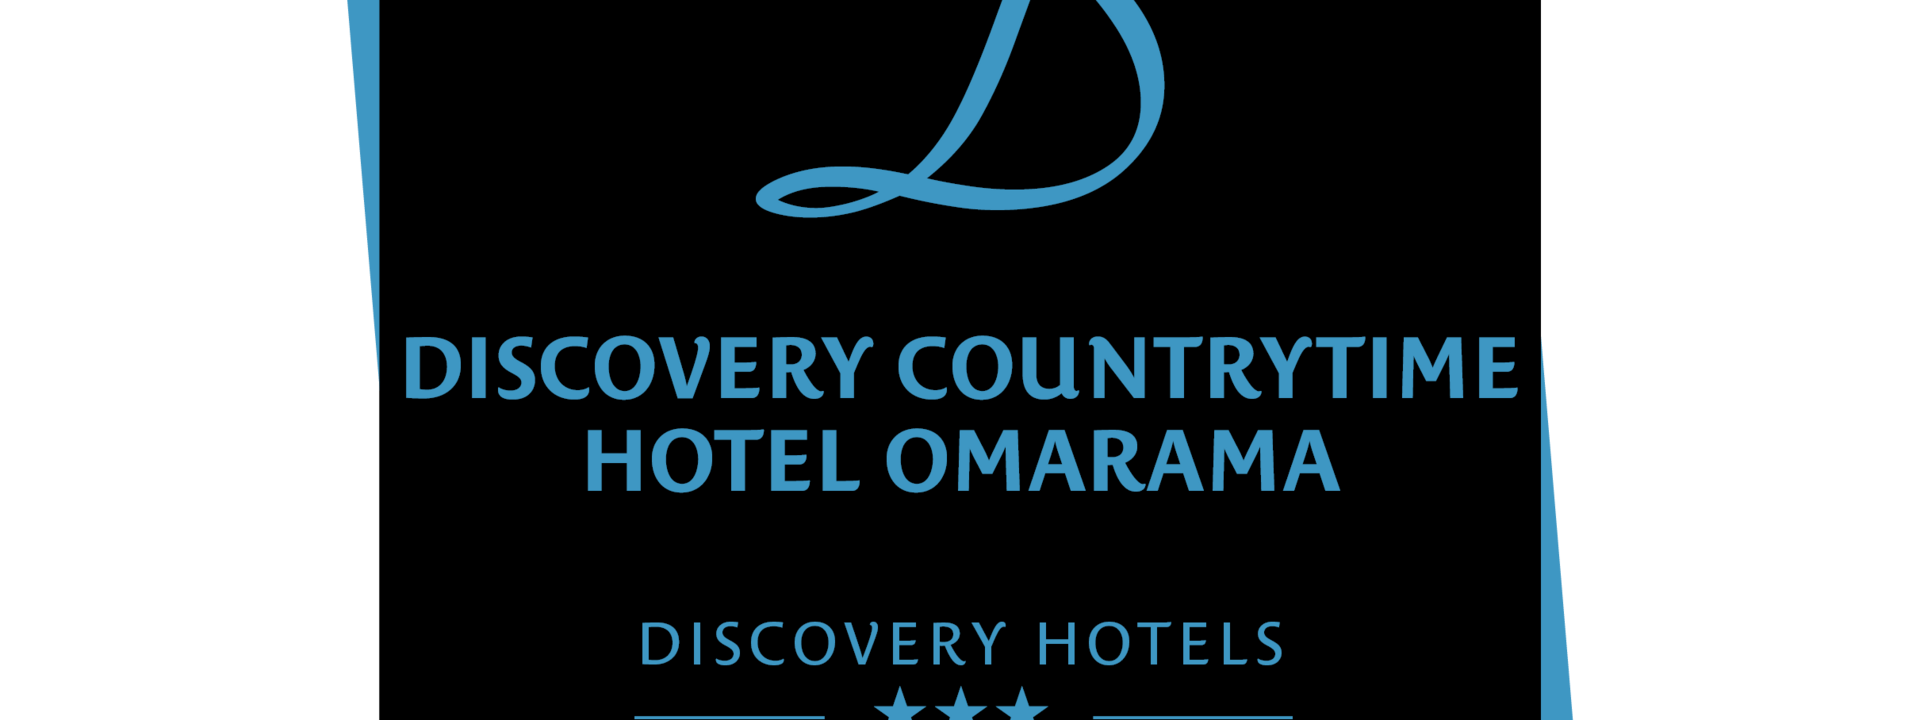 Discovery Countrytime Hotel Omarama logo4 PNG.png